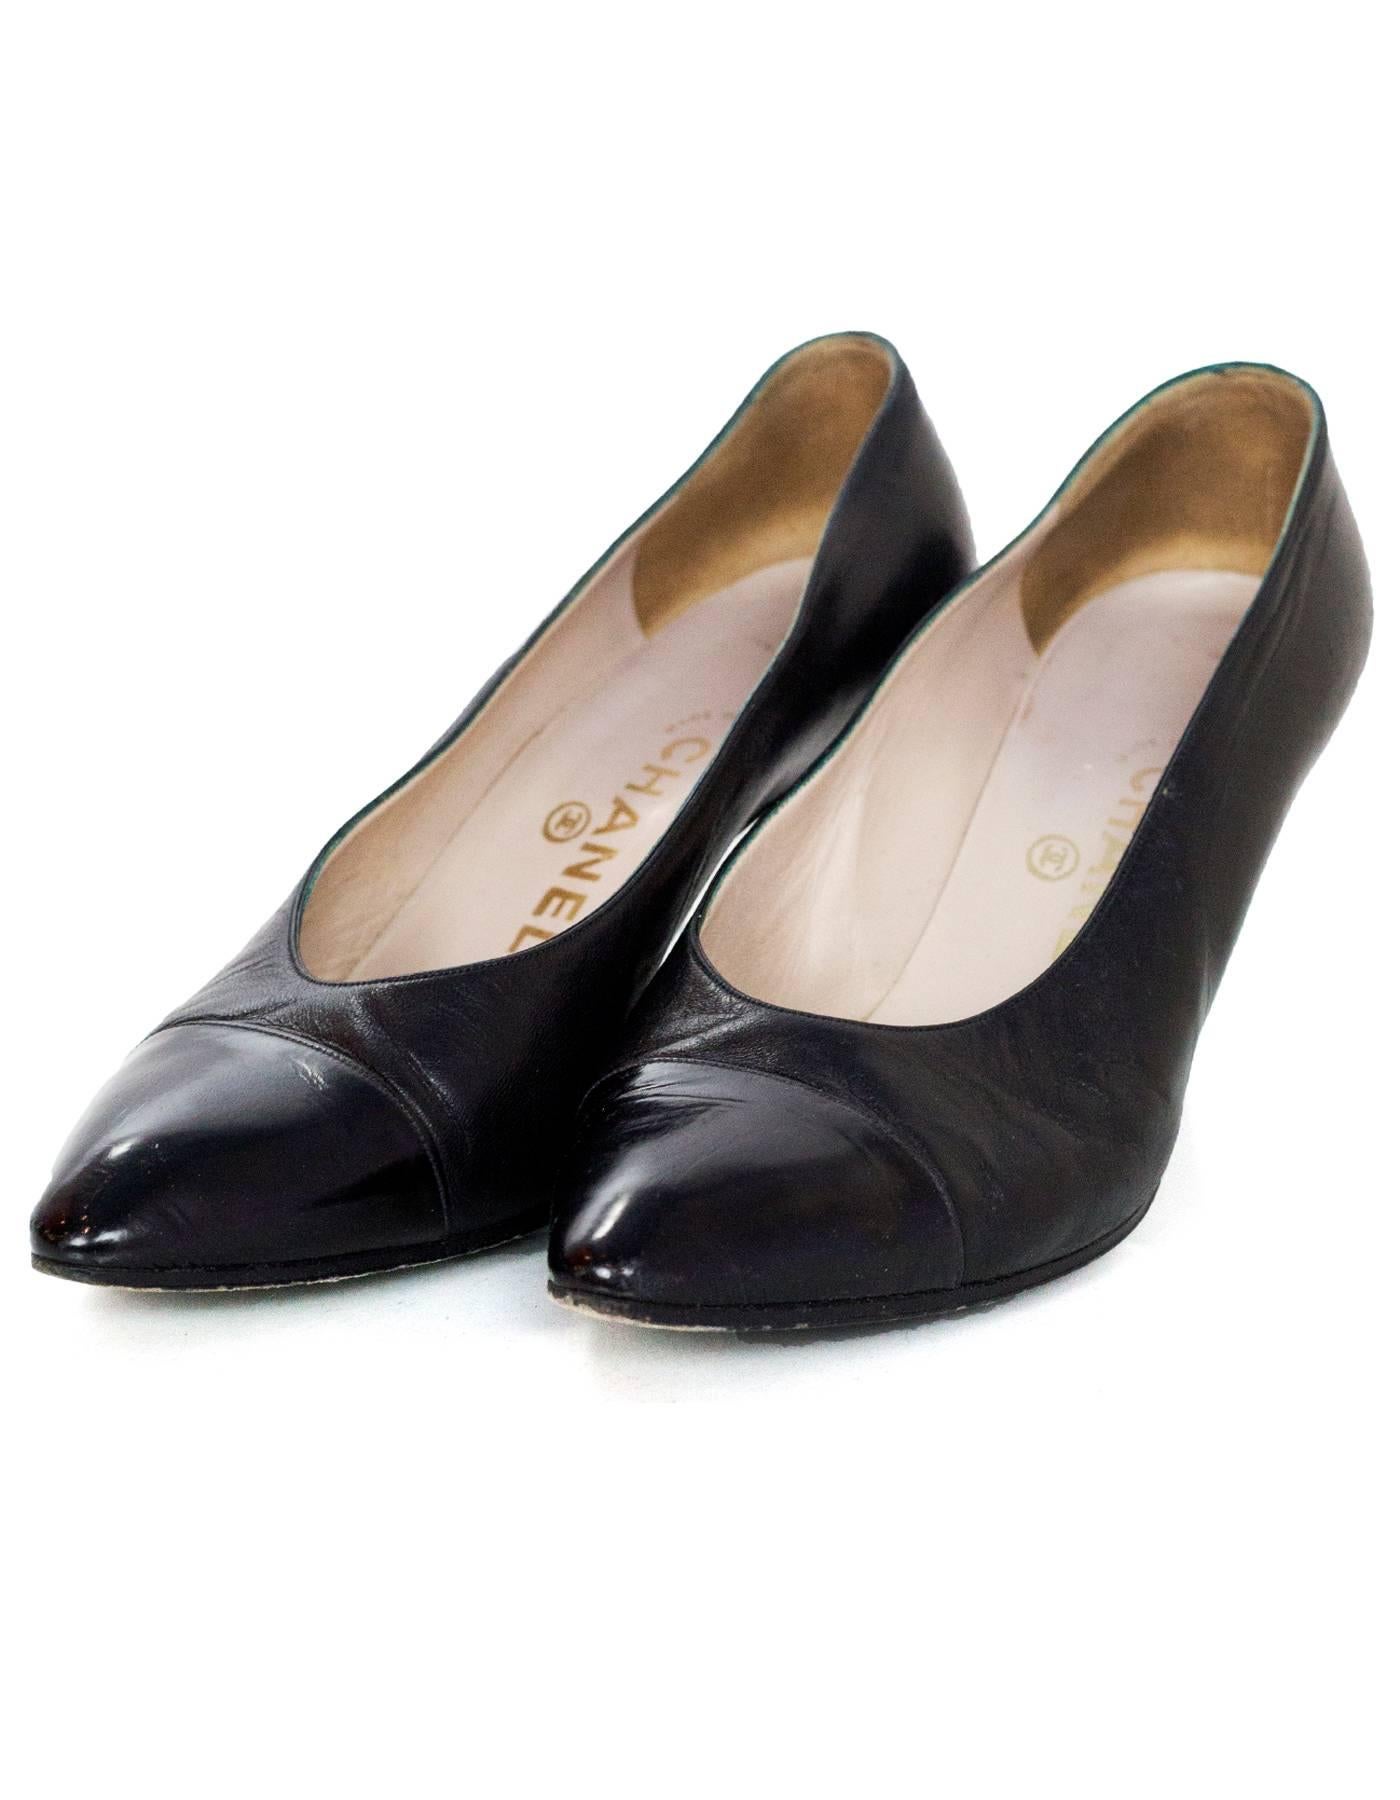 Chanel Black Leather Cap-Toe Pumps Sz 37.5

Made In: Italy
Color: Black
Materials: Leather
Closure/Opening: Slide on
Sole Stamp: CC Made in Italy 37 1/2
Overall Condition: Very good pre-owned condition with the exception oflight wear at insoles and